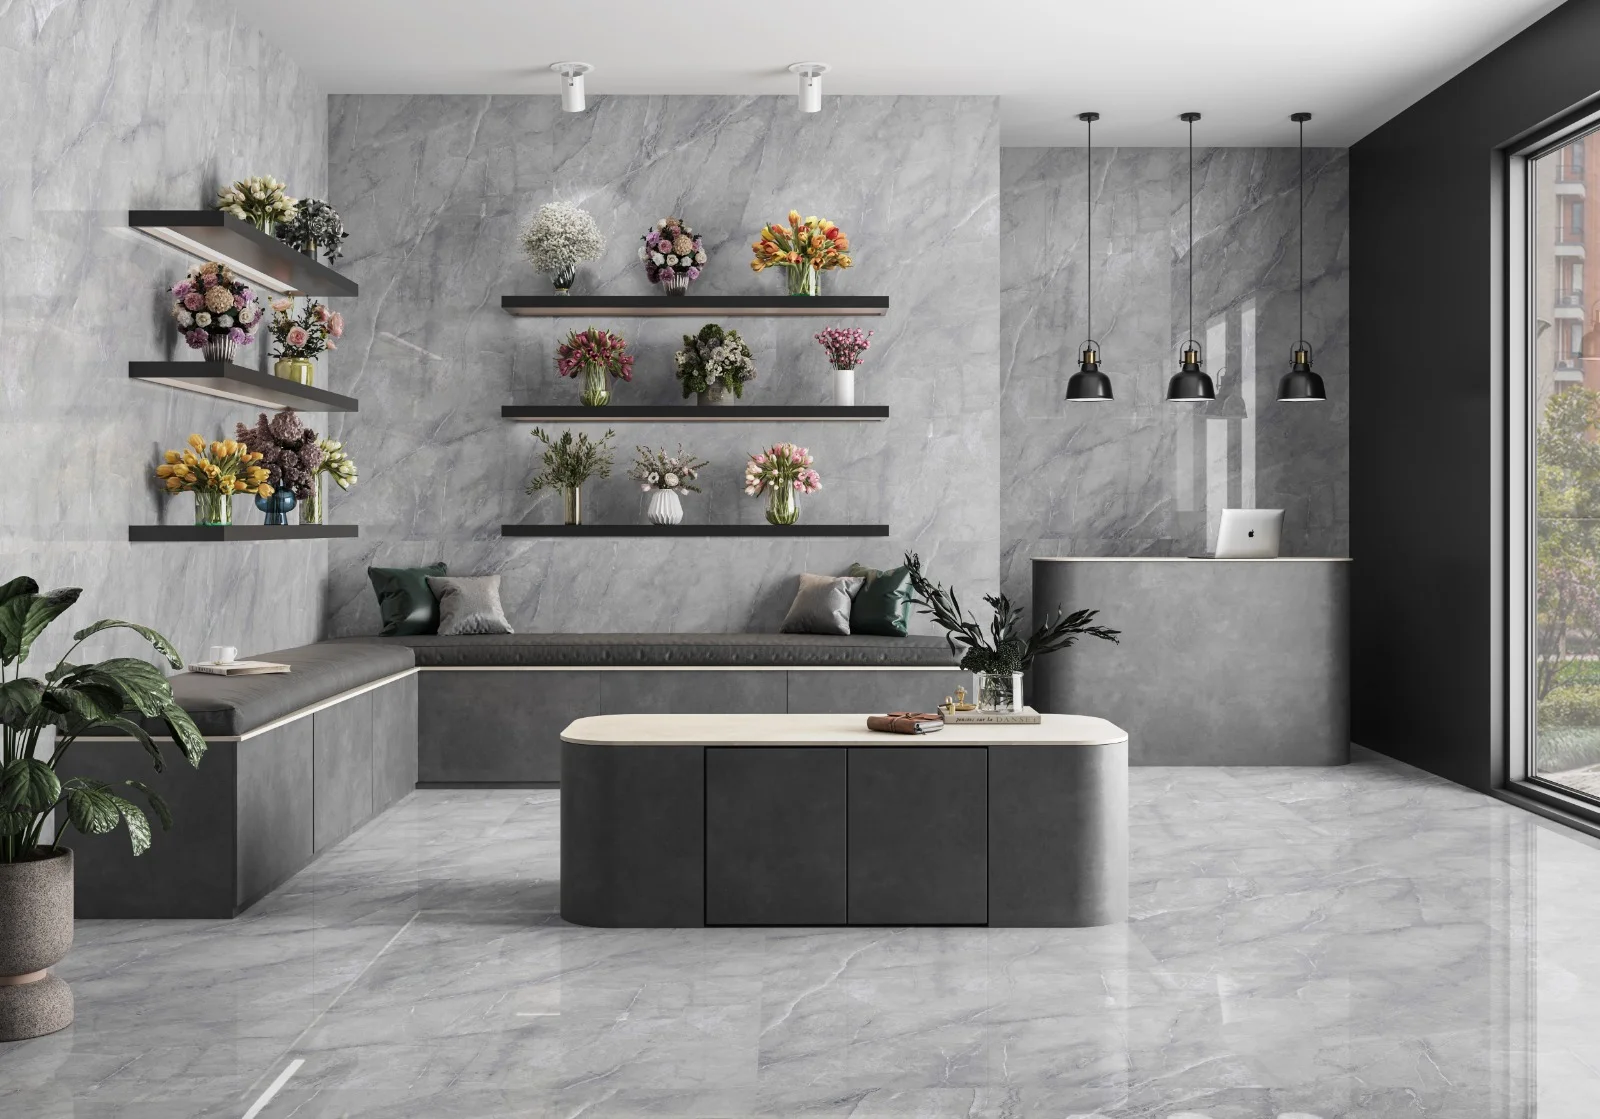 Top Floor and Wall Tile Manufacturer in Canada